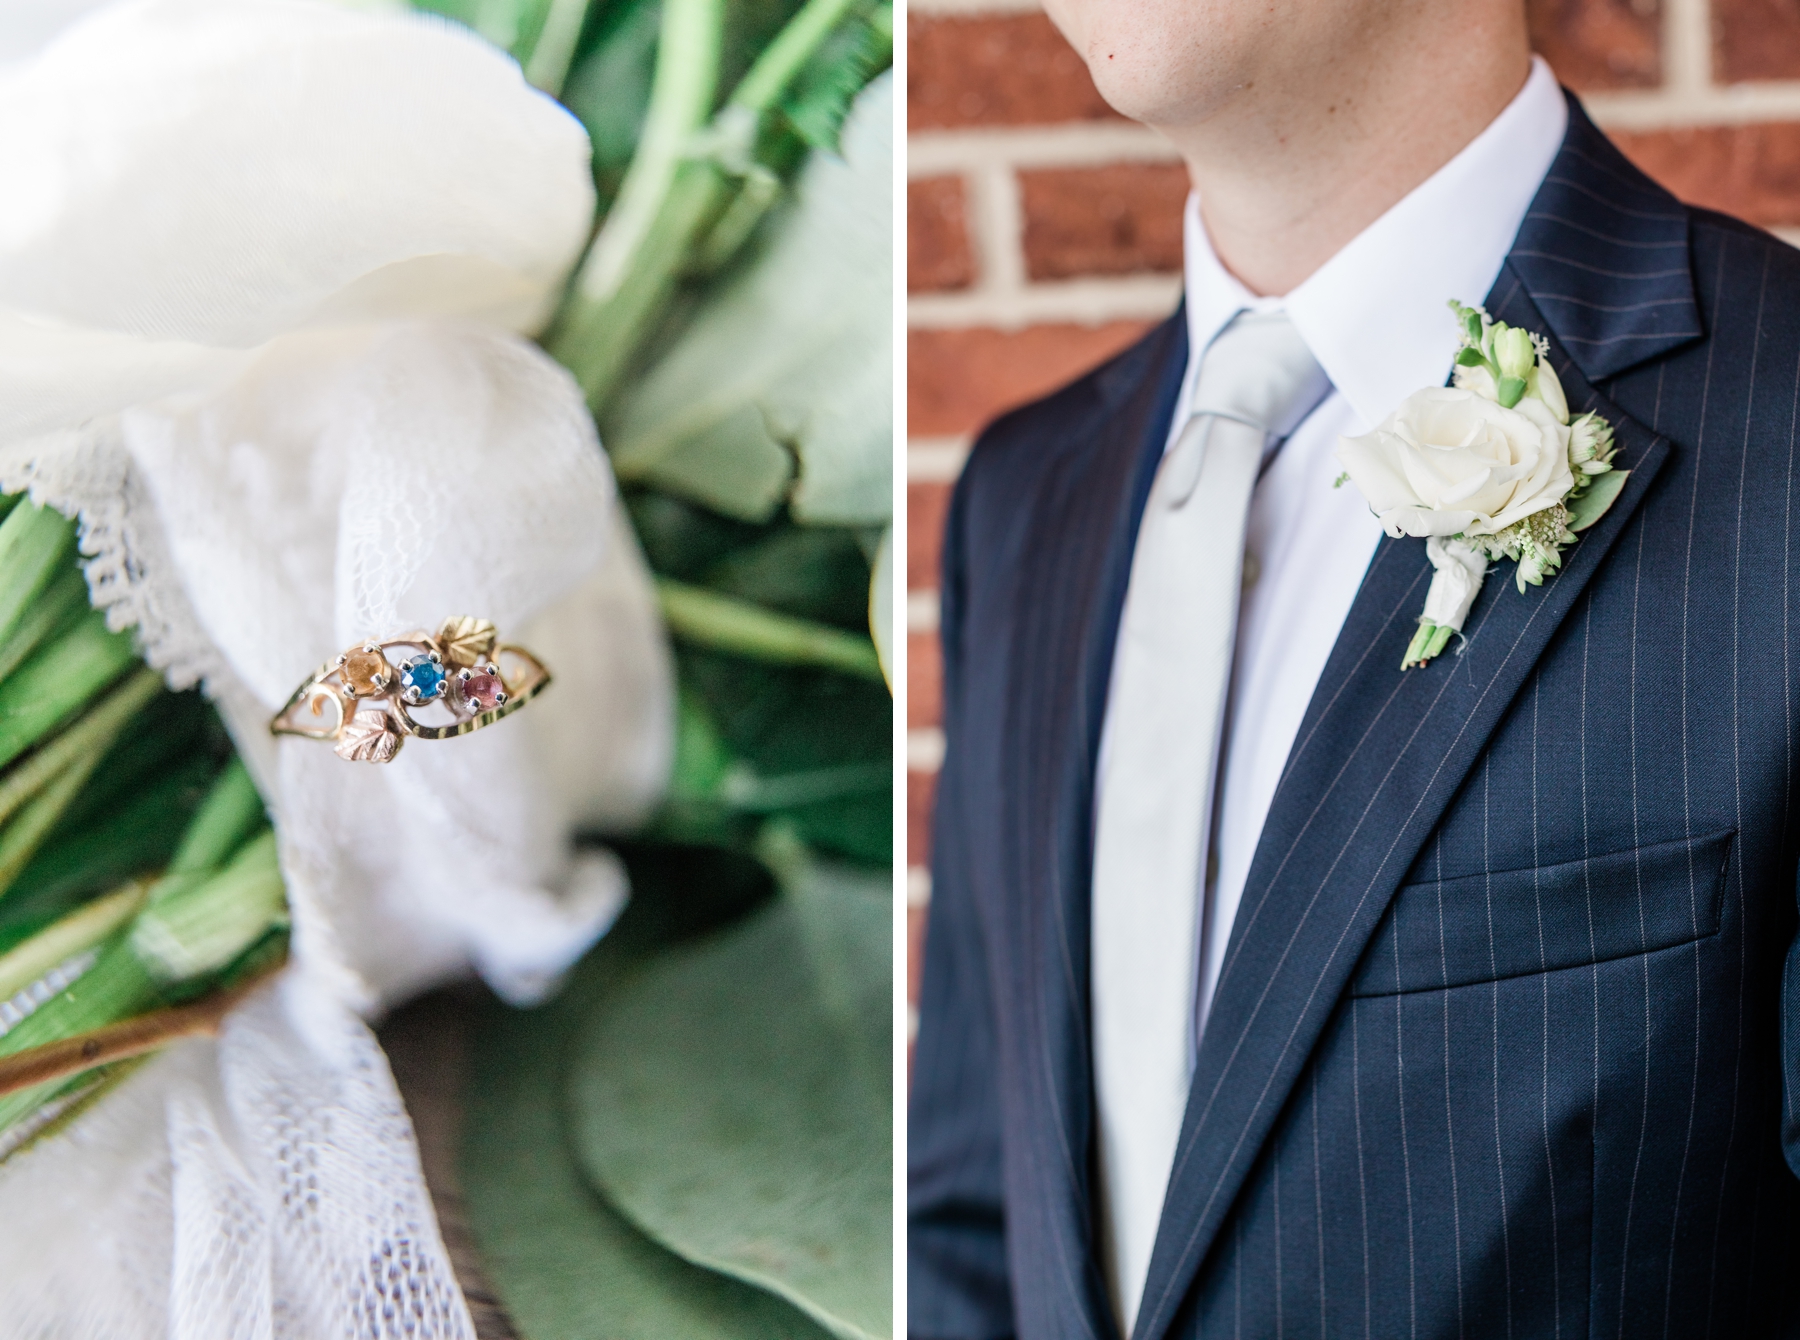 Rebecca and Richard’s rooftop elopement at The Alida Hotel in Savannah